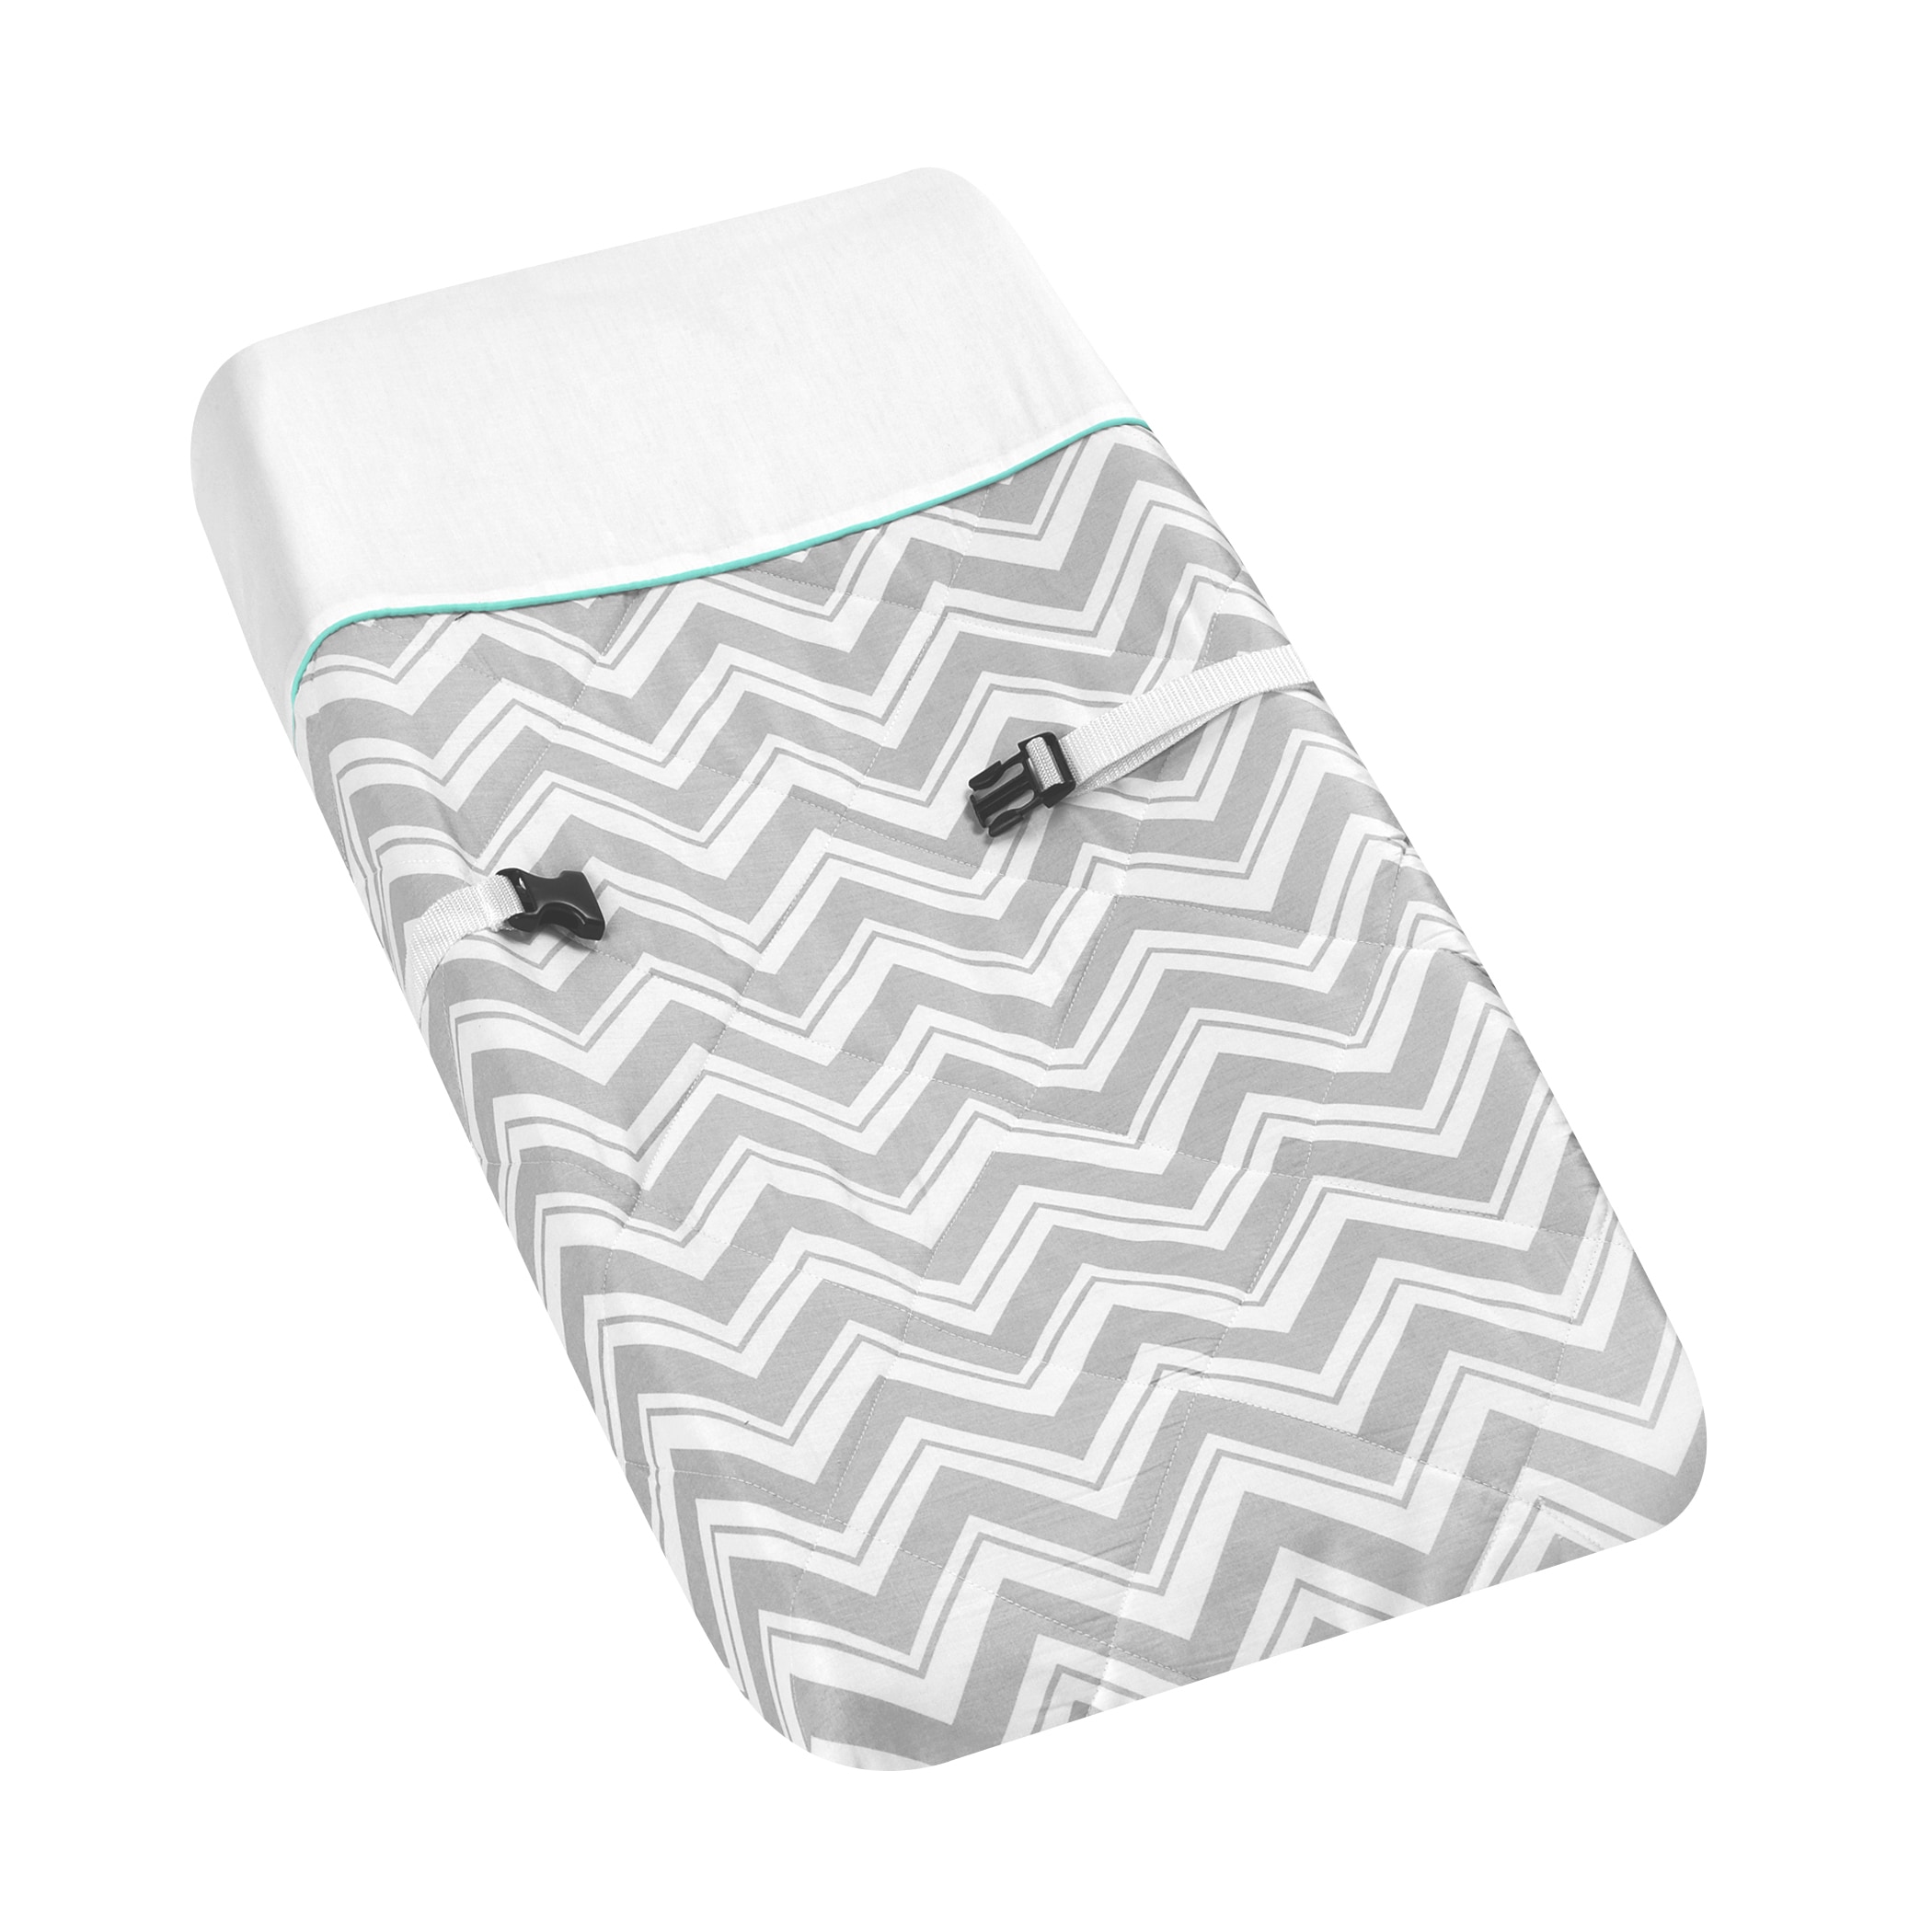 Sweet Jojo Designs Turquoise Zig Zag Changing Pad Cover (100 percent cottonDimensions 31 inches high x 17 inches wide)